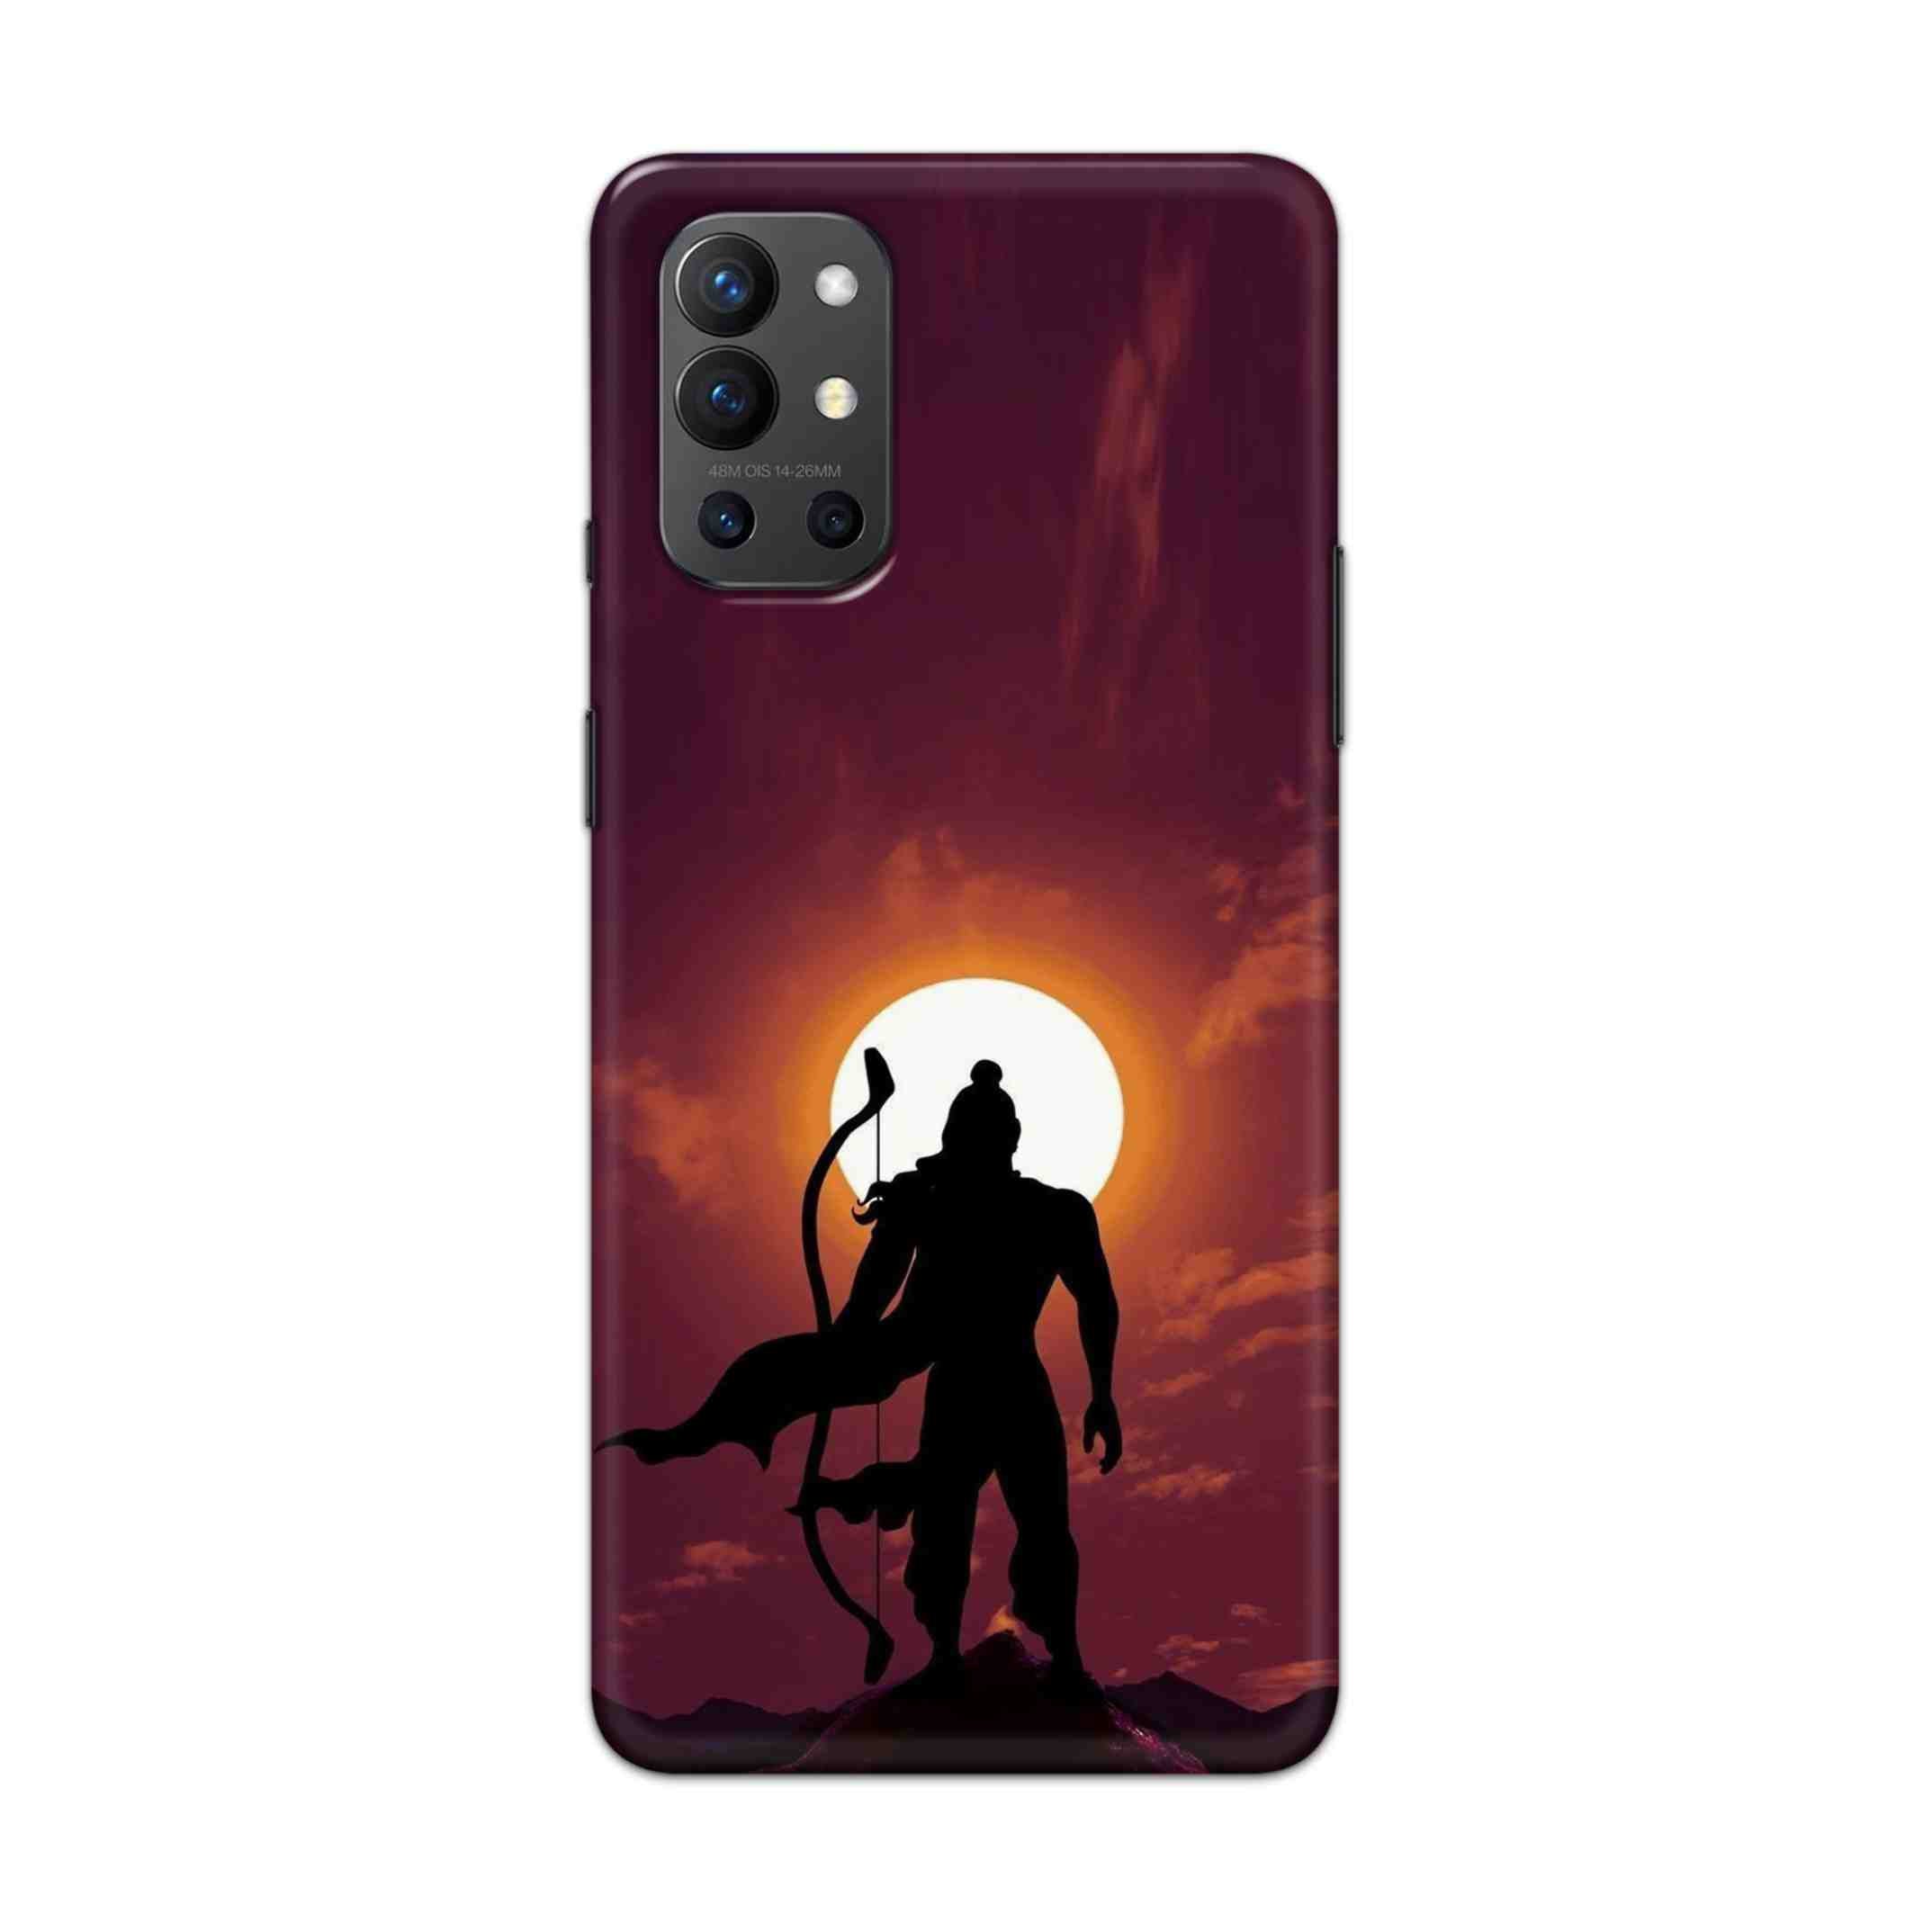 Buy Ram Hard Back Mobile Phone Case Cover For OnePlus 9R / 8T Online